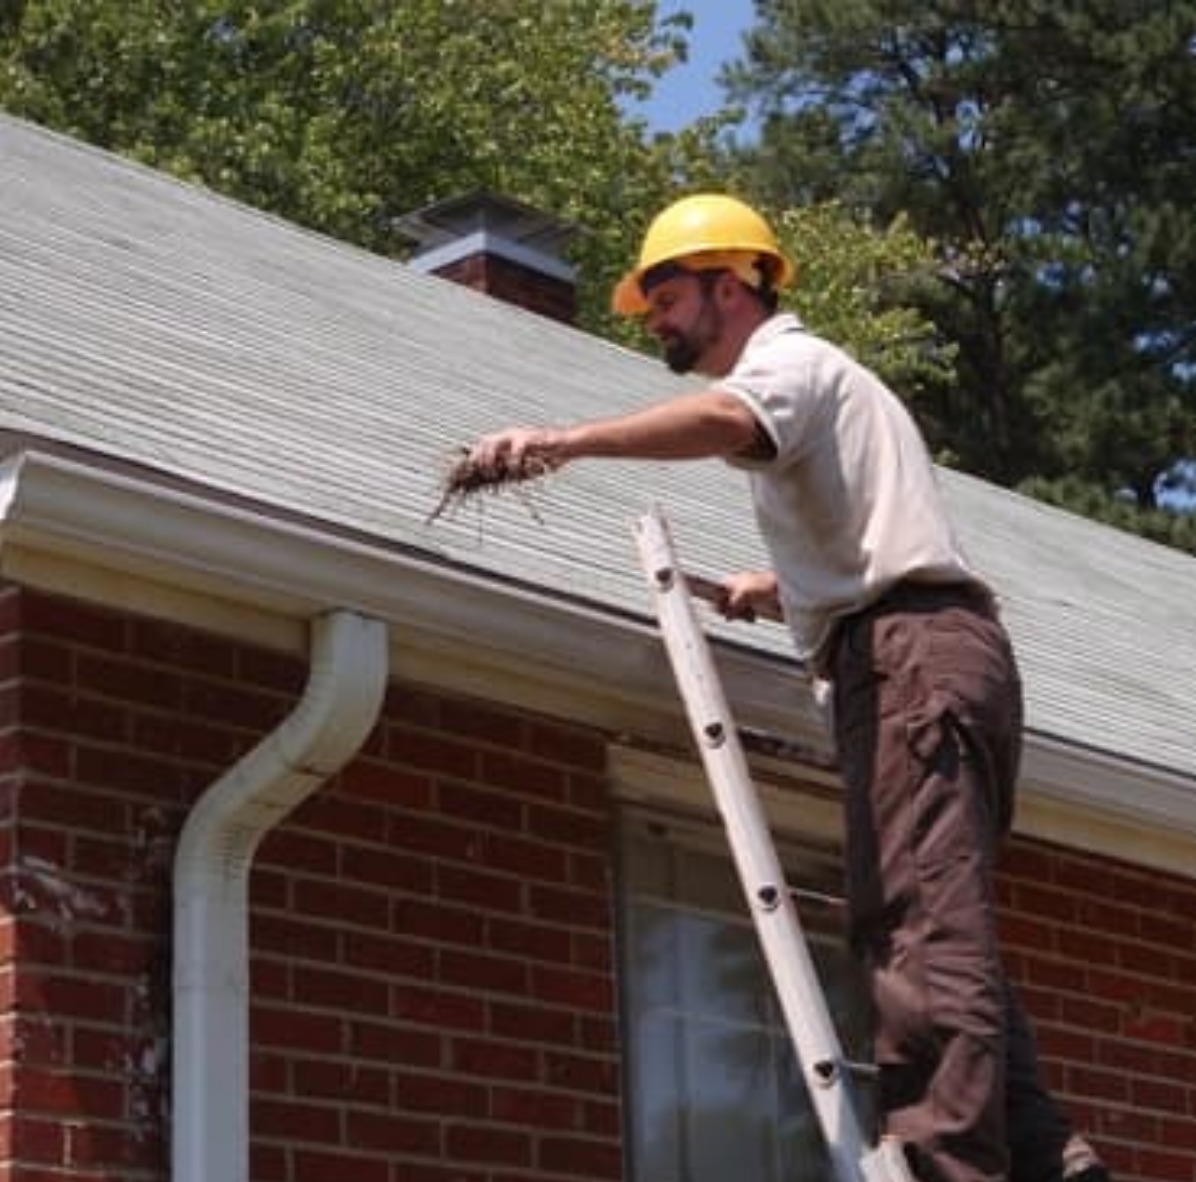 Westchester County NY Gutter Cleaning